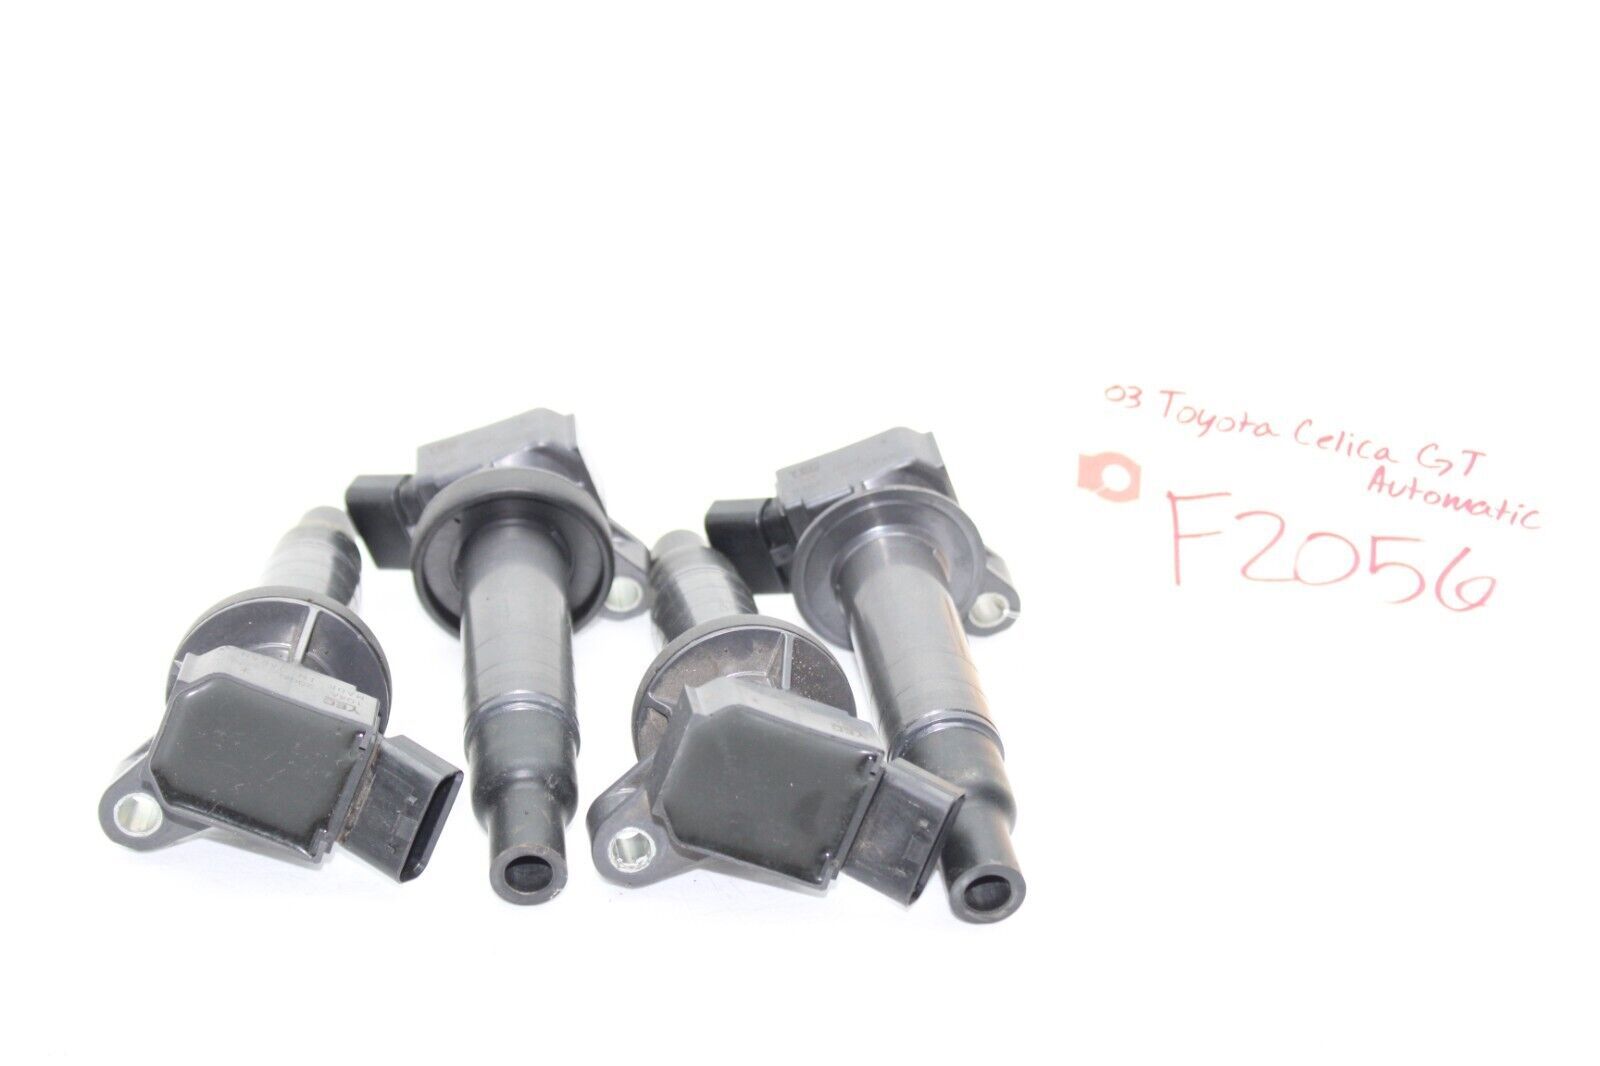 00-05 TOYOTA CELICA GT AUTOMATIC Ignition Coils X4 F2056 - $72.00